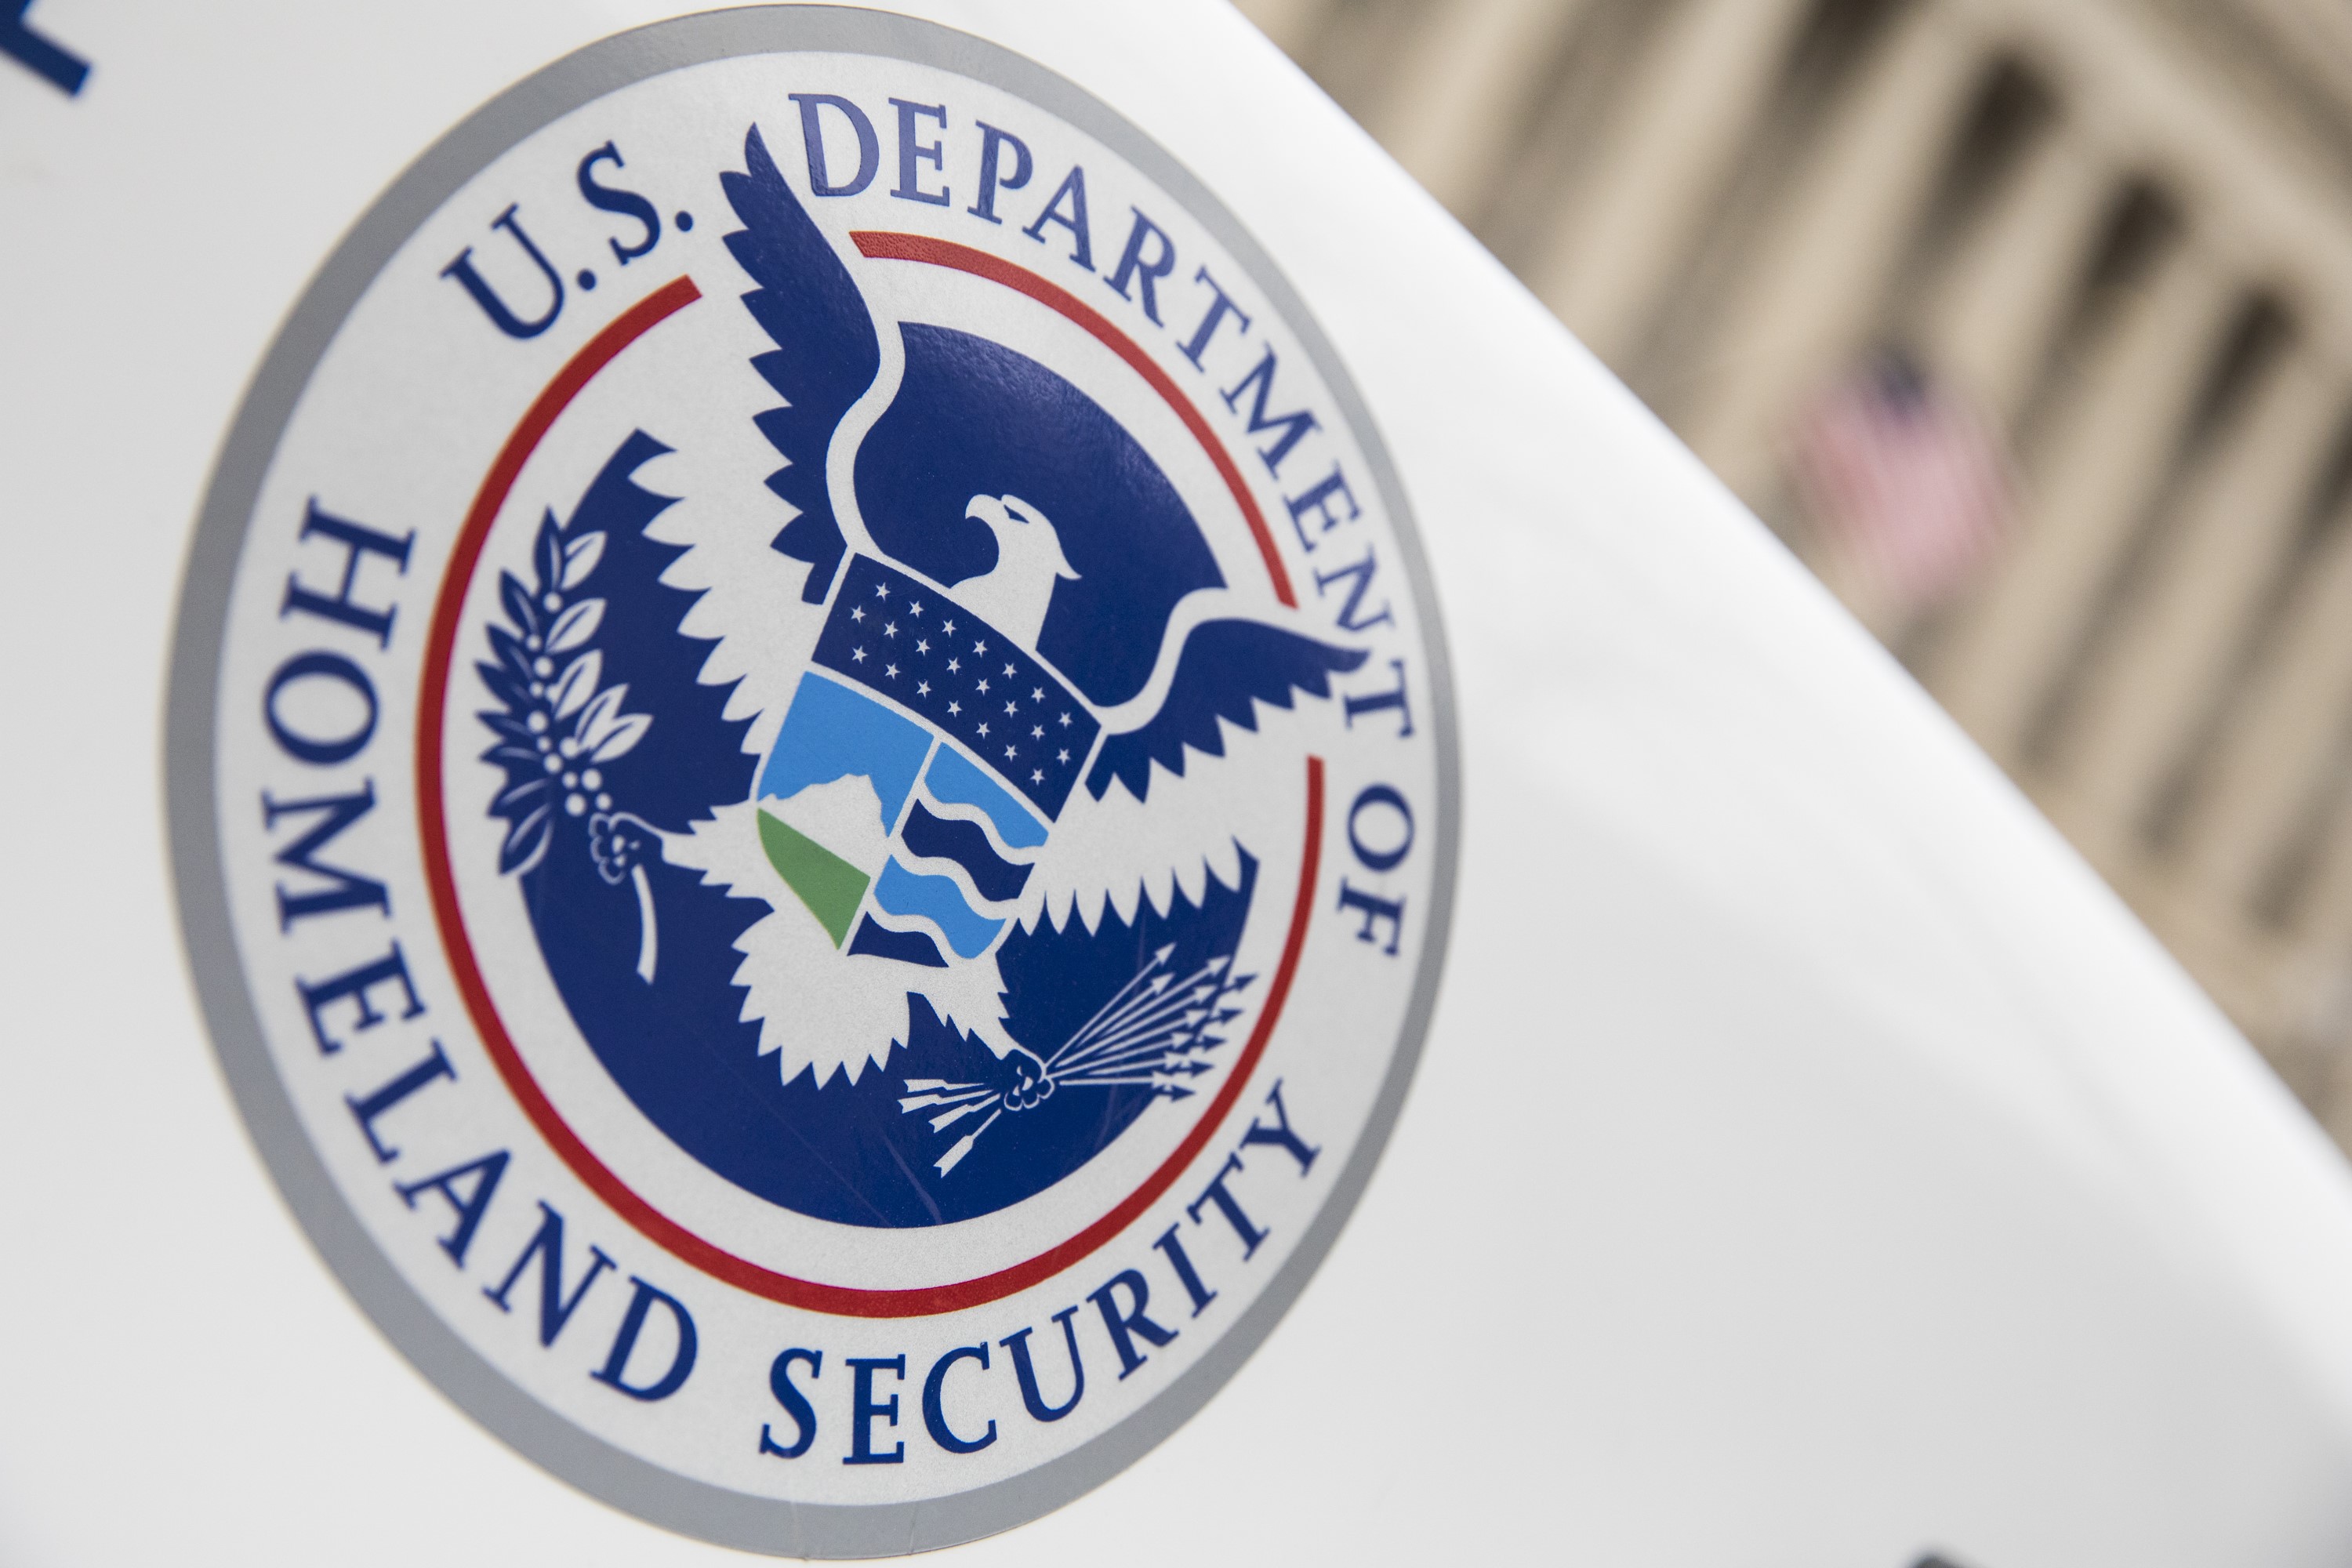 Homeland Security may use companies to find extremism on social media